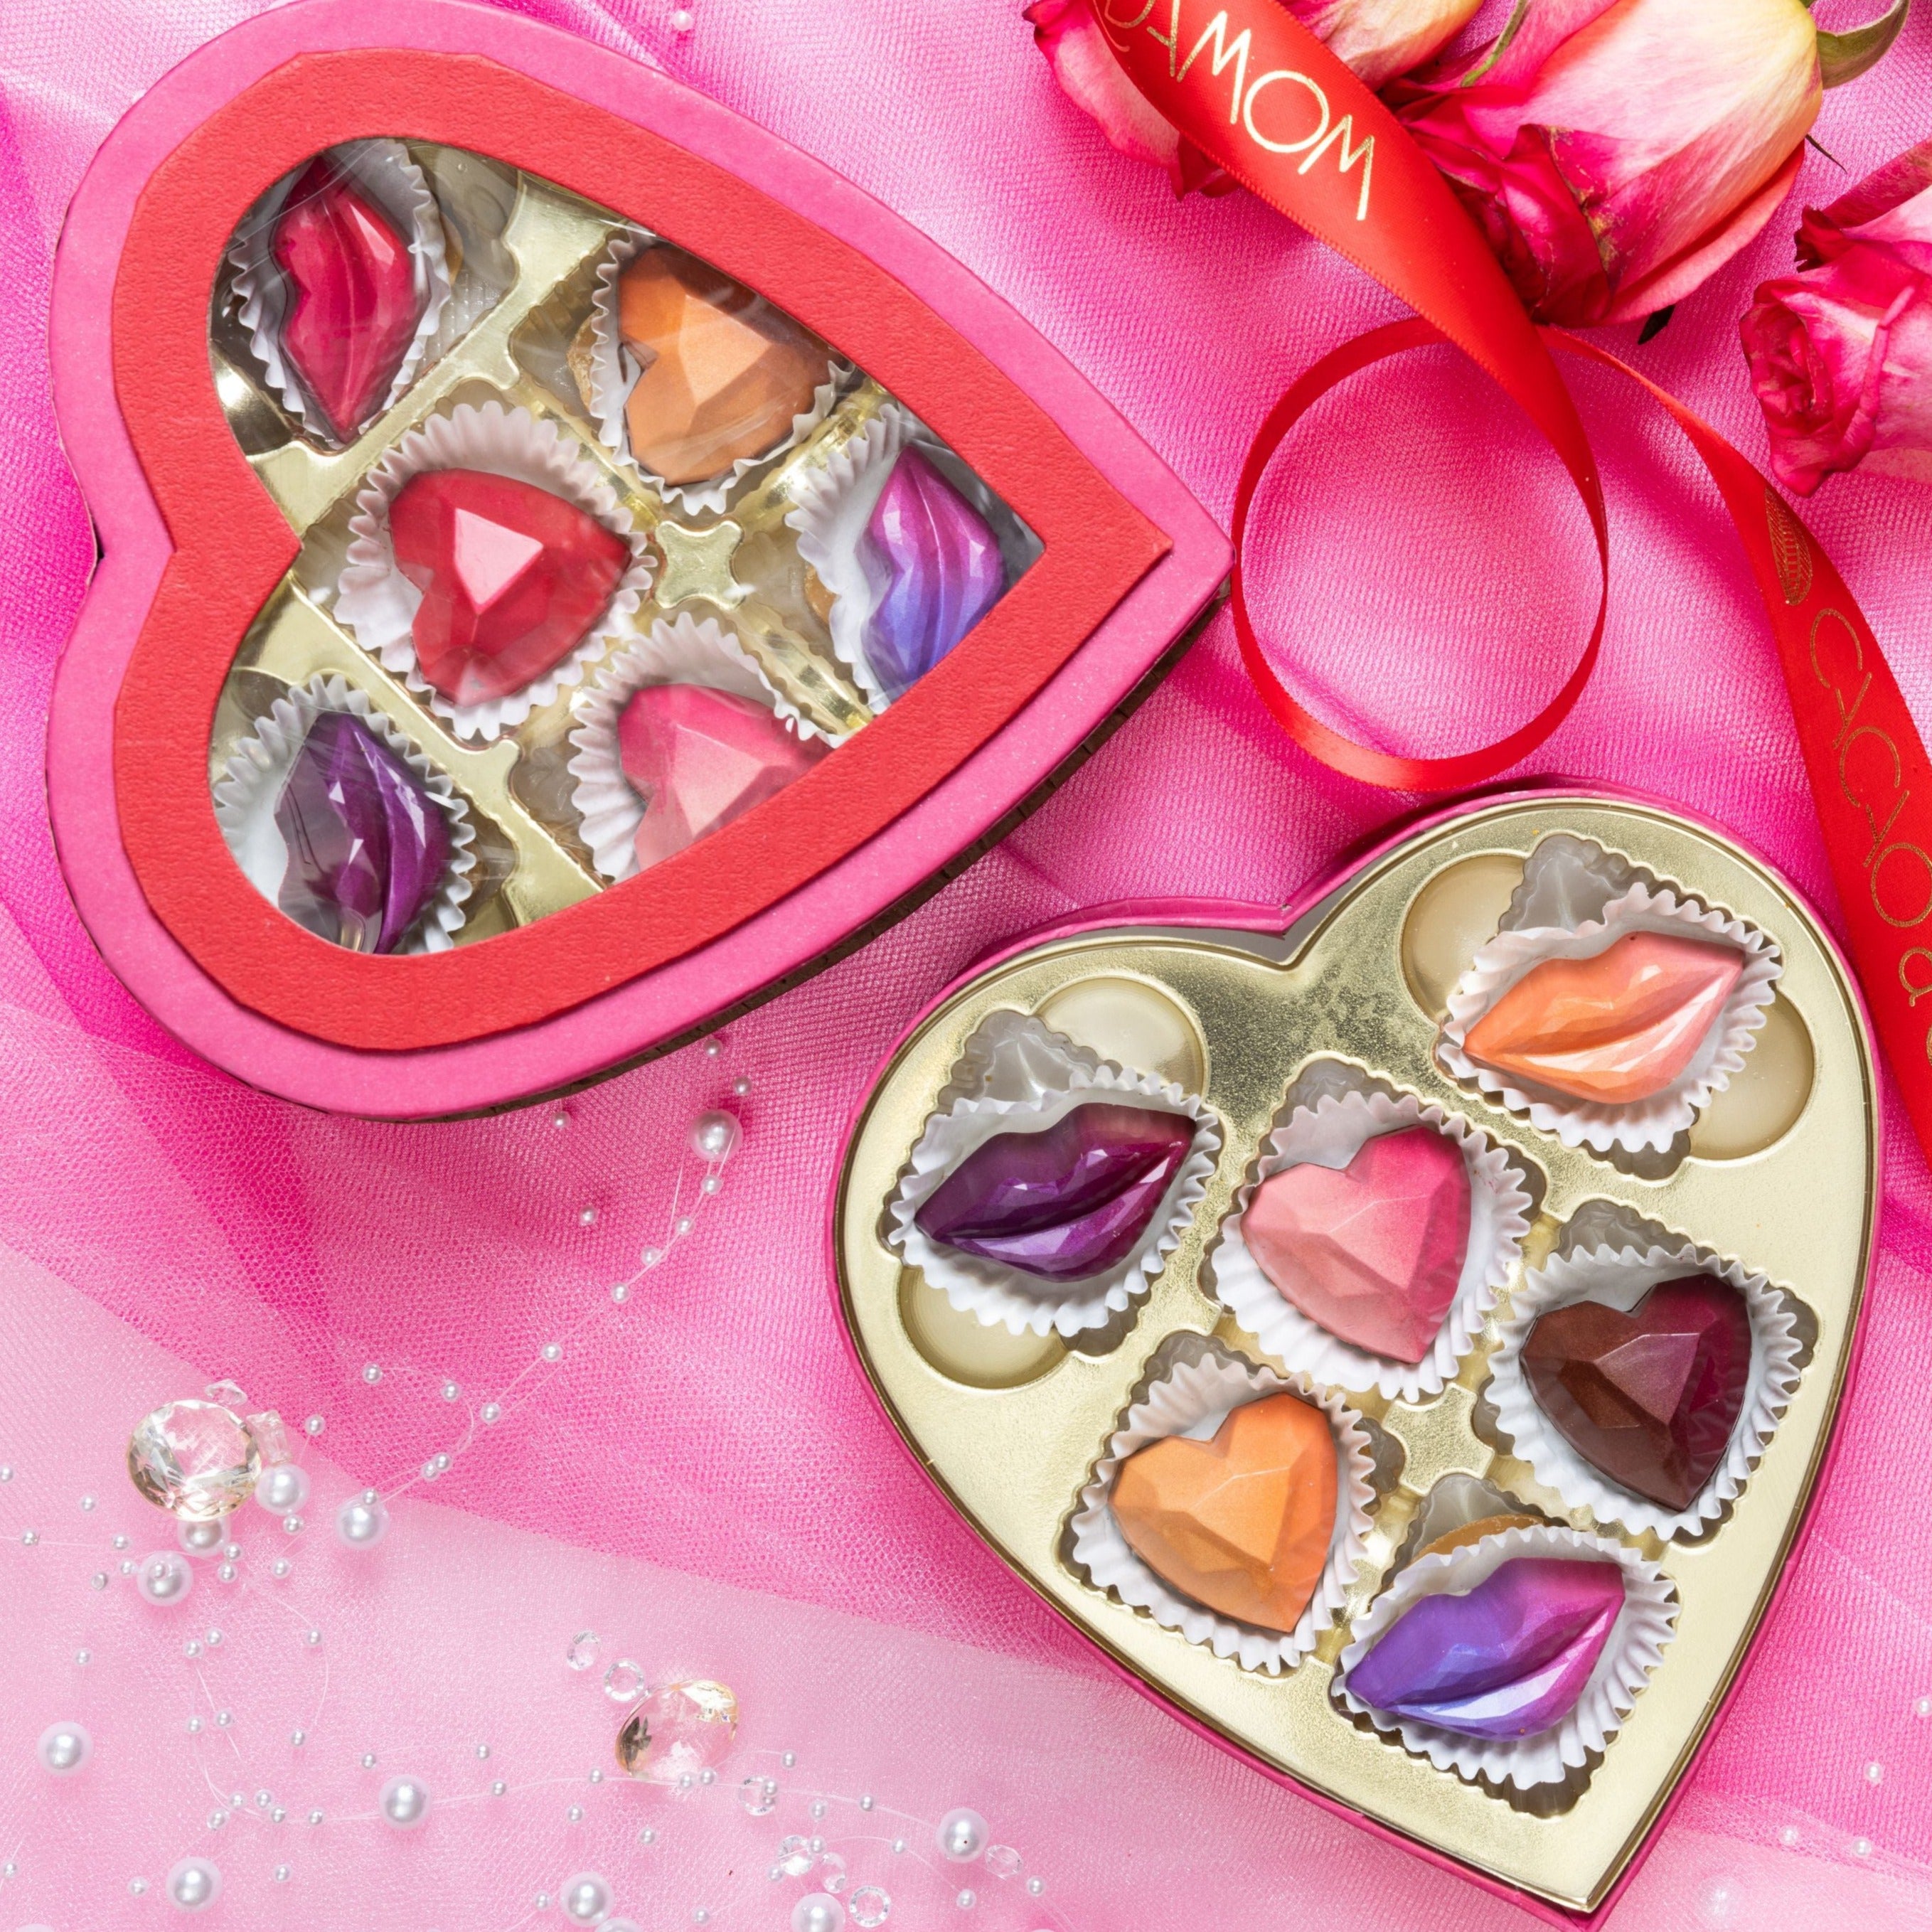 "Hearts & Lips" Limited Edition Valentine's Chocolate Box- 6 Pieces